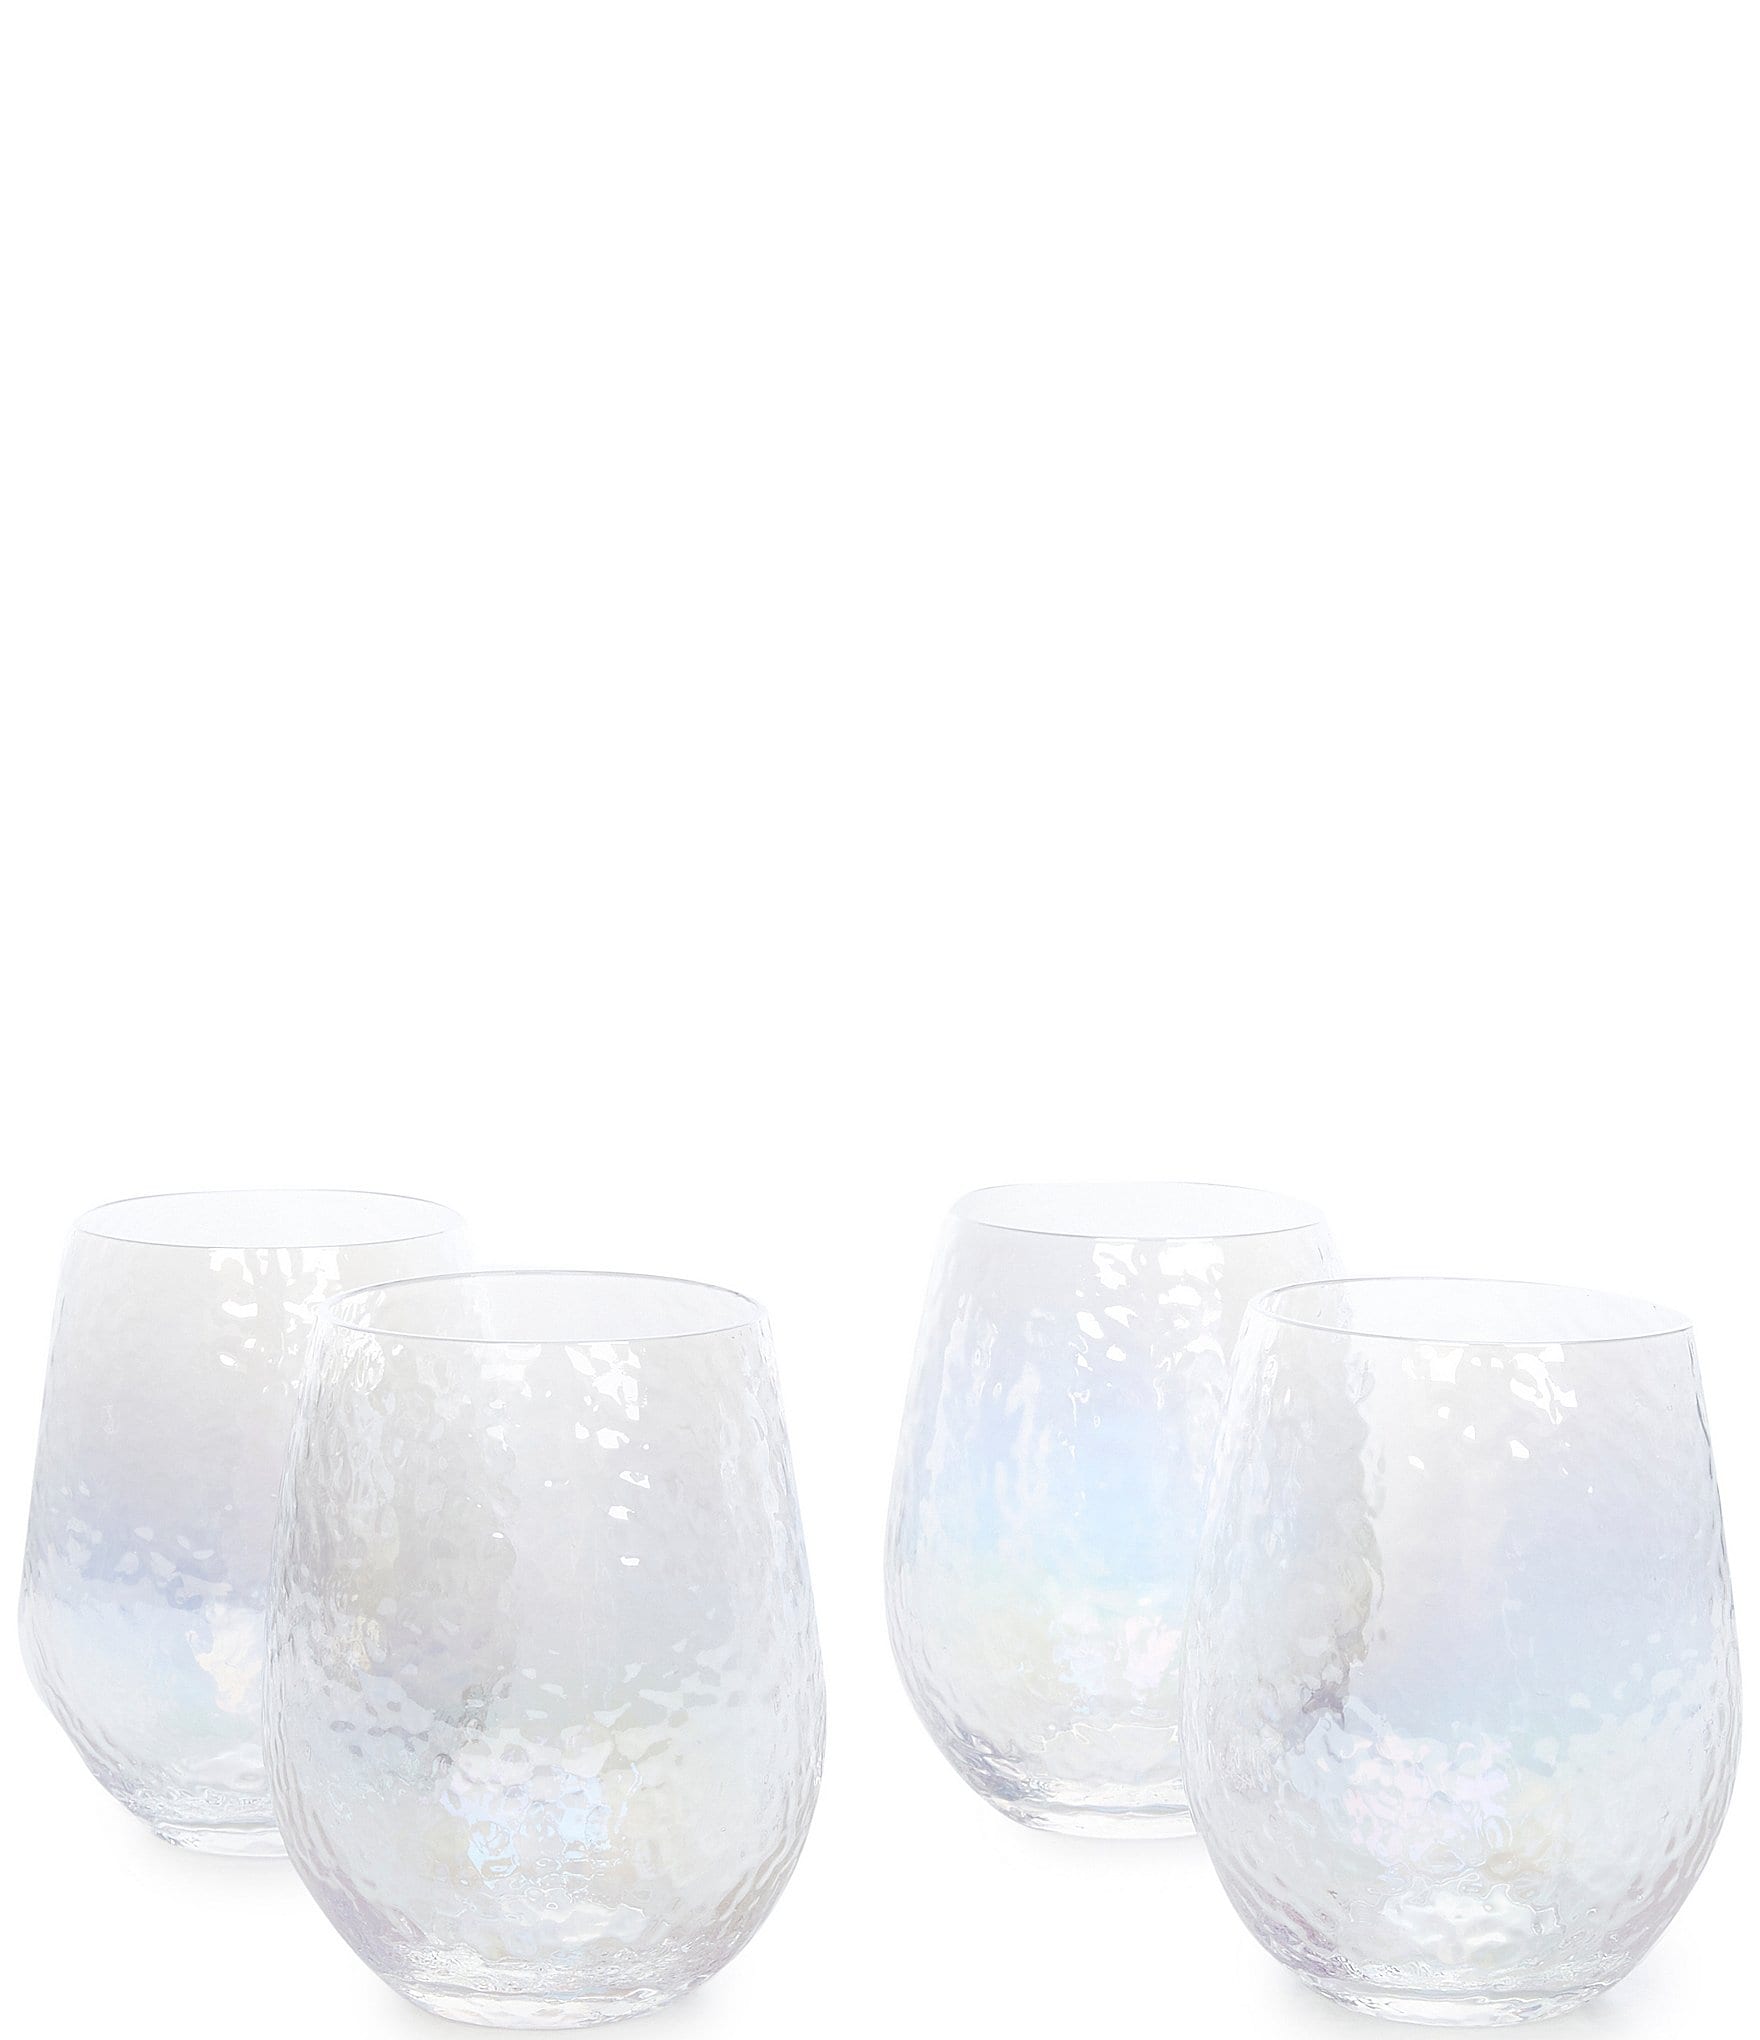 BENETI Stemless Clear Cocktail Glasses, 4-Piece